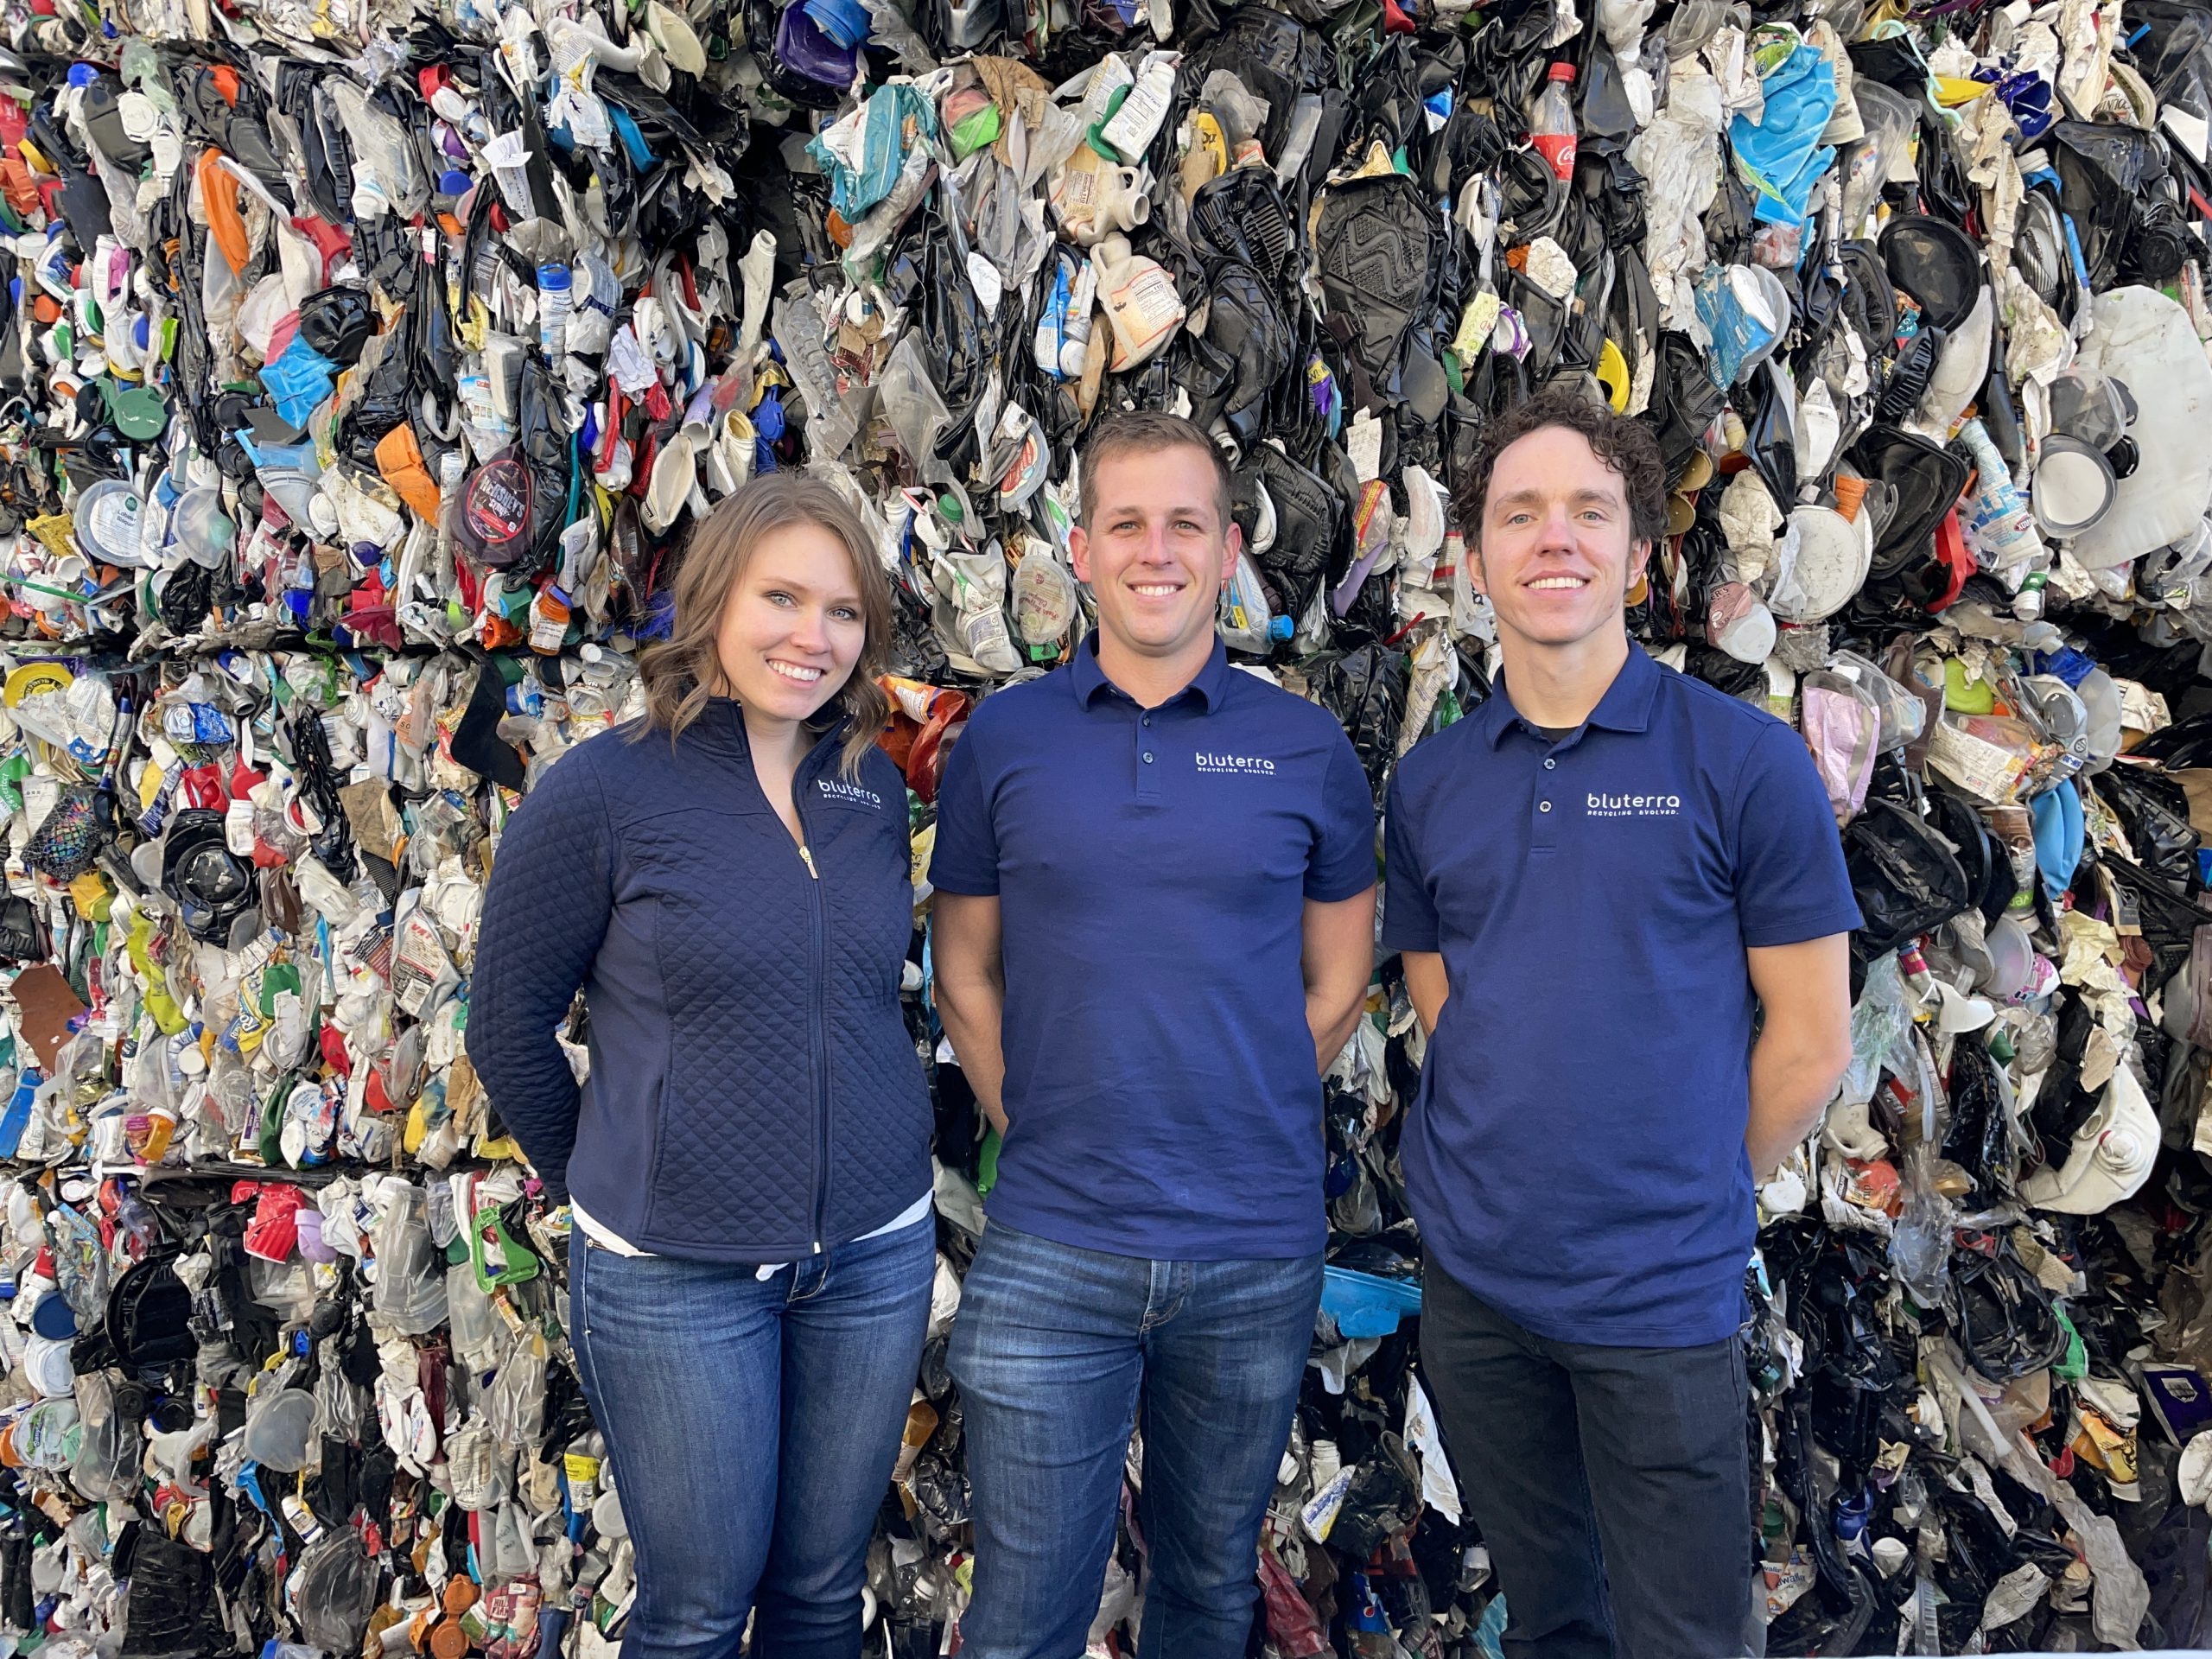 Company’s A.I. Aims to Make Recycling “Mindlessly Easy”